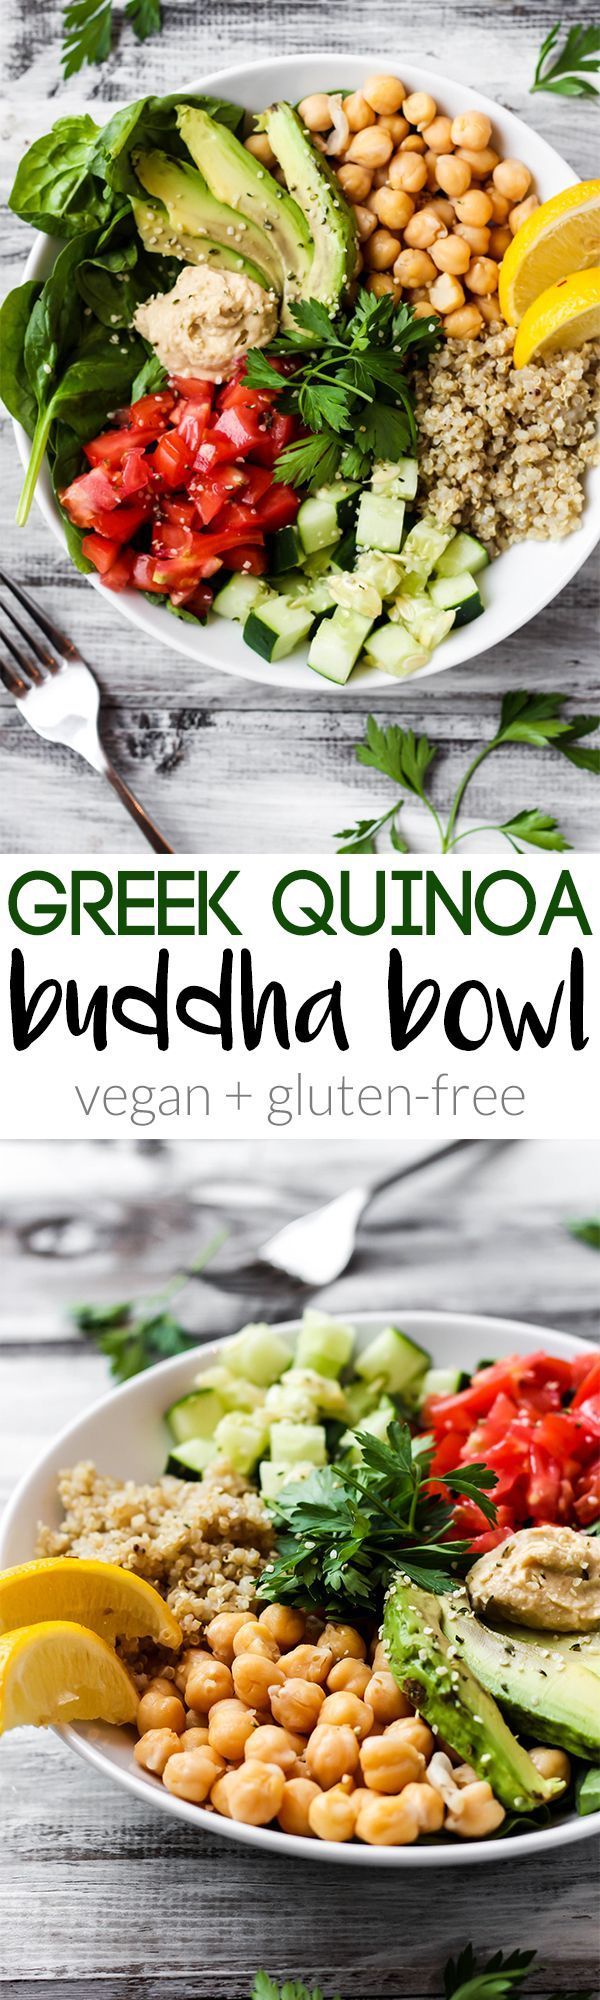 Full of greens and beans, this Greek Quinoa Buddha Bowl is the ultimate healthy lunch or dinner. Its ready in 20 minutes and